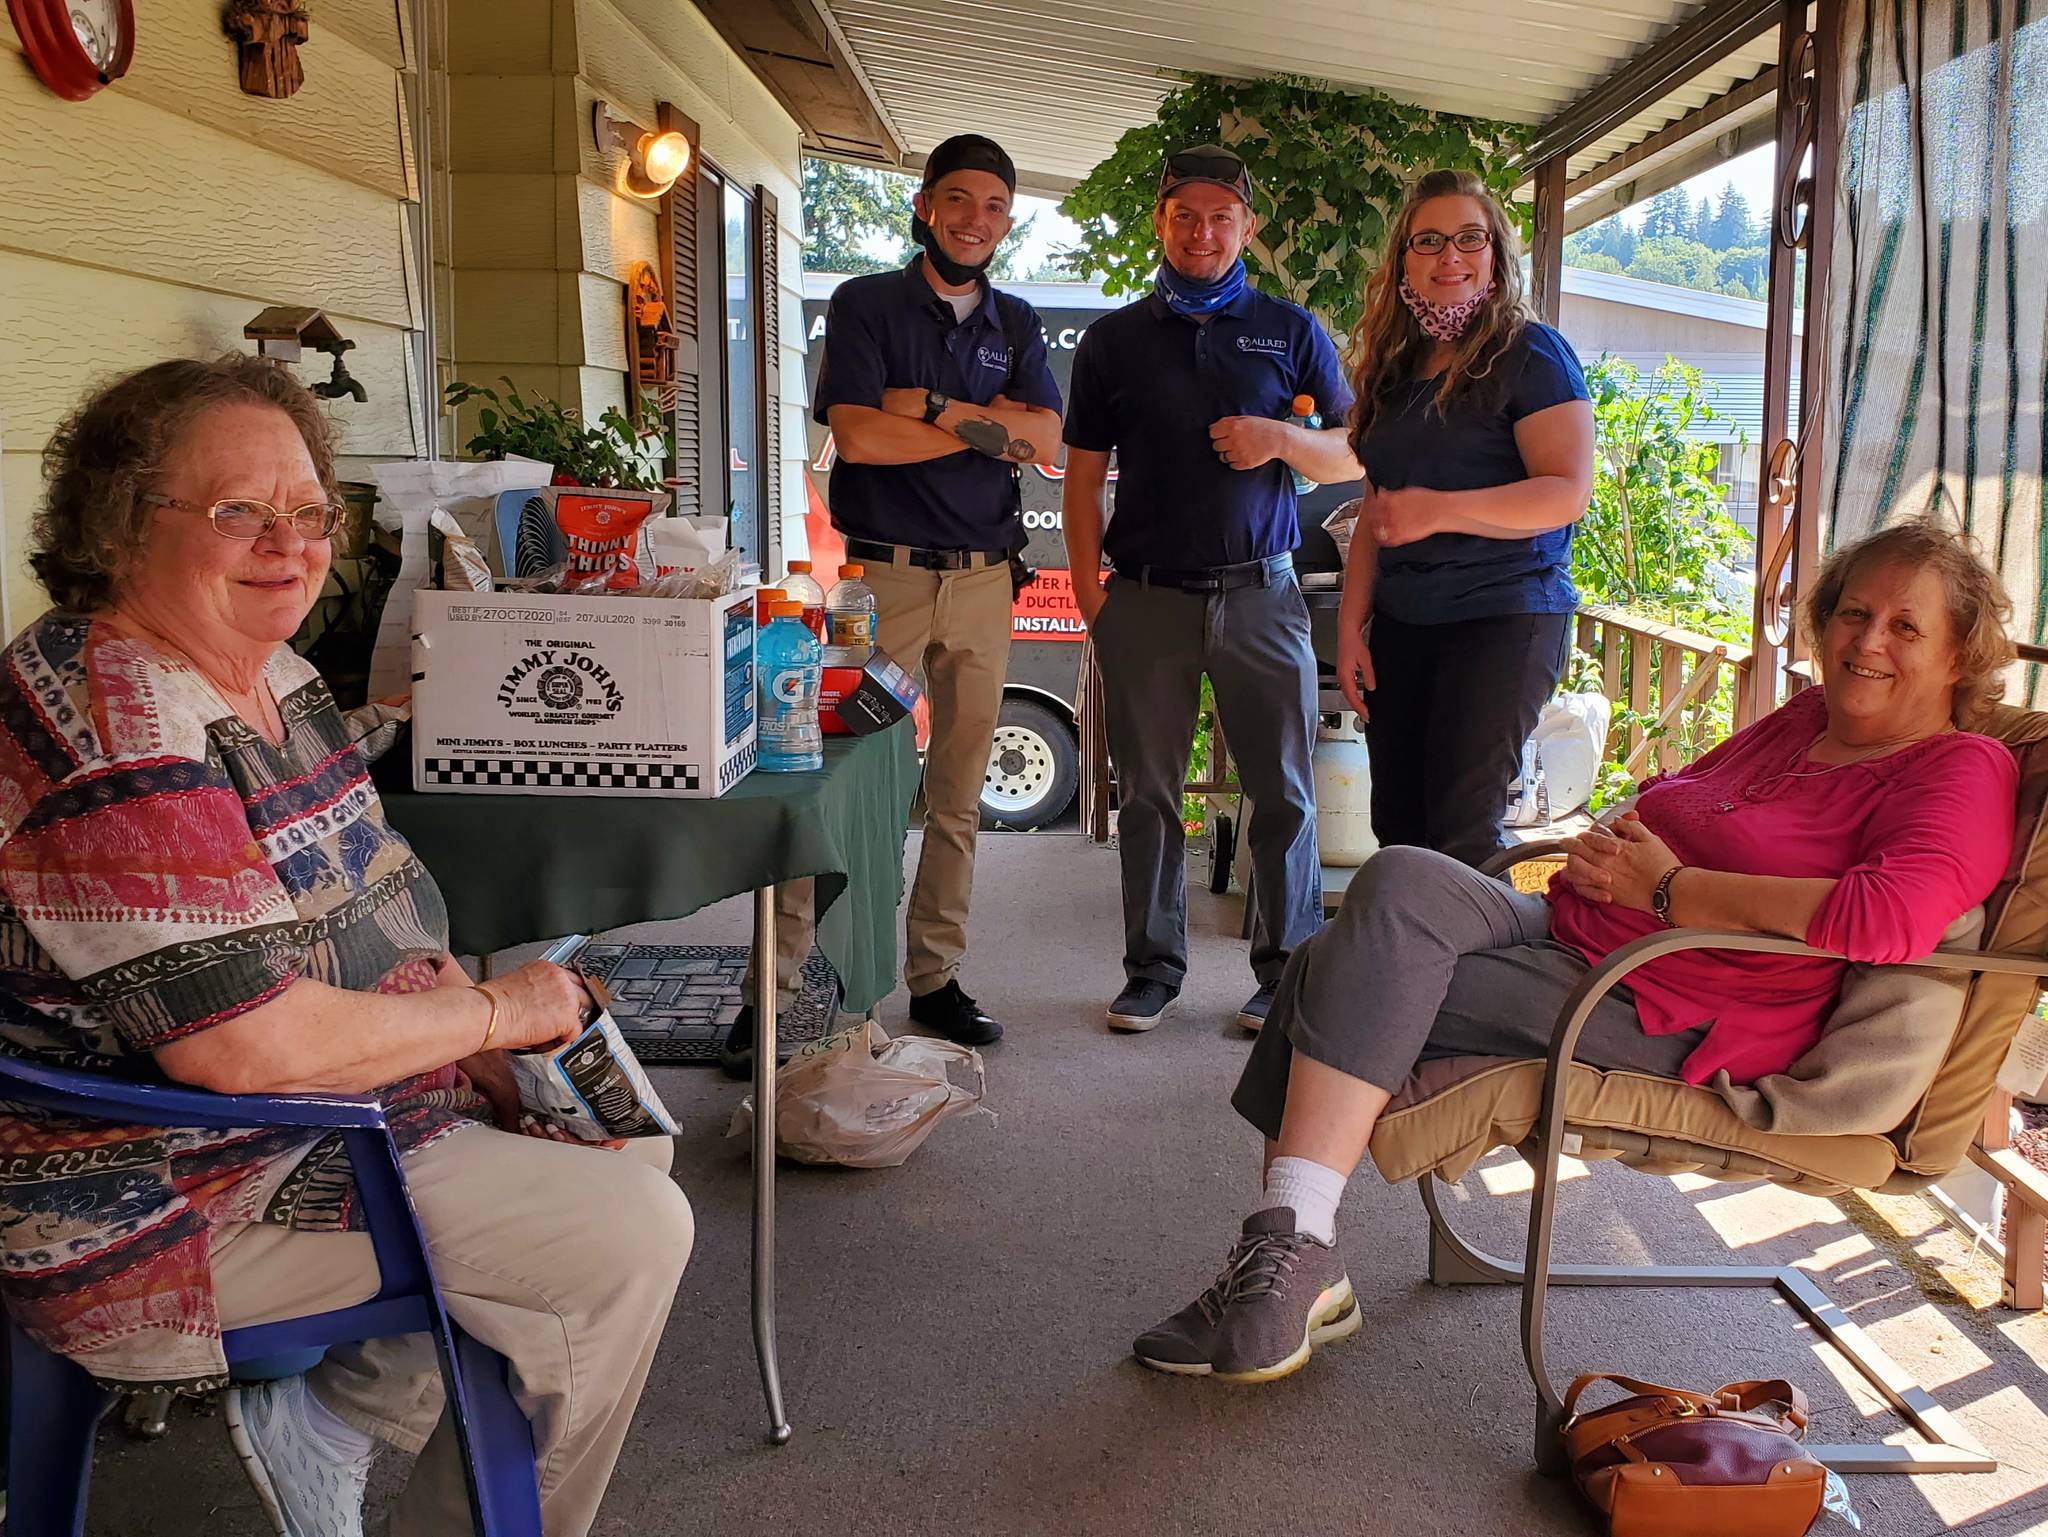 Donna Goodman, left, is all smiles after a crew from Allred showed up at her home en masse to replace her defunct heating and cooling system with a brand new one for free last Thursday. With her on the porch from left to right are Nick Allred, Dan Allred and Amy Shrake of Allred, and to the right is Goodman’s friend and neighbor, Karen Shepherd. Courtesy photo